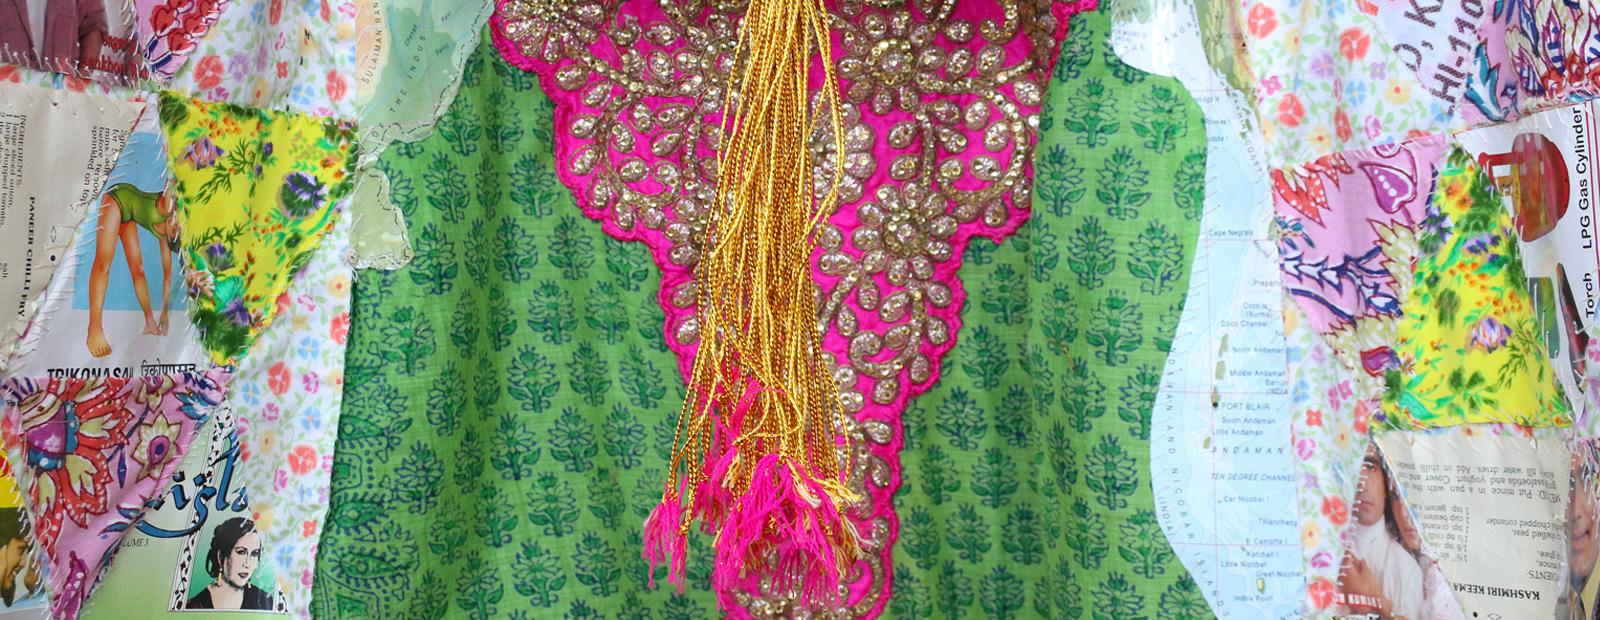 Meera Sethi, Dilli from Outerwhere Series (detail), 2022. Mixed Media. Photograph by Karly Boileau